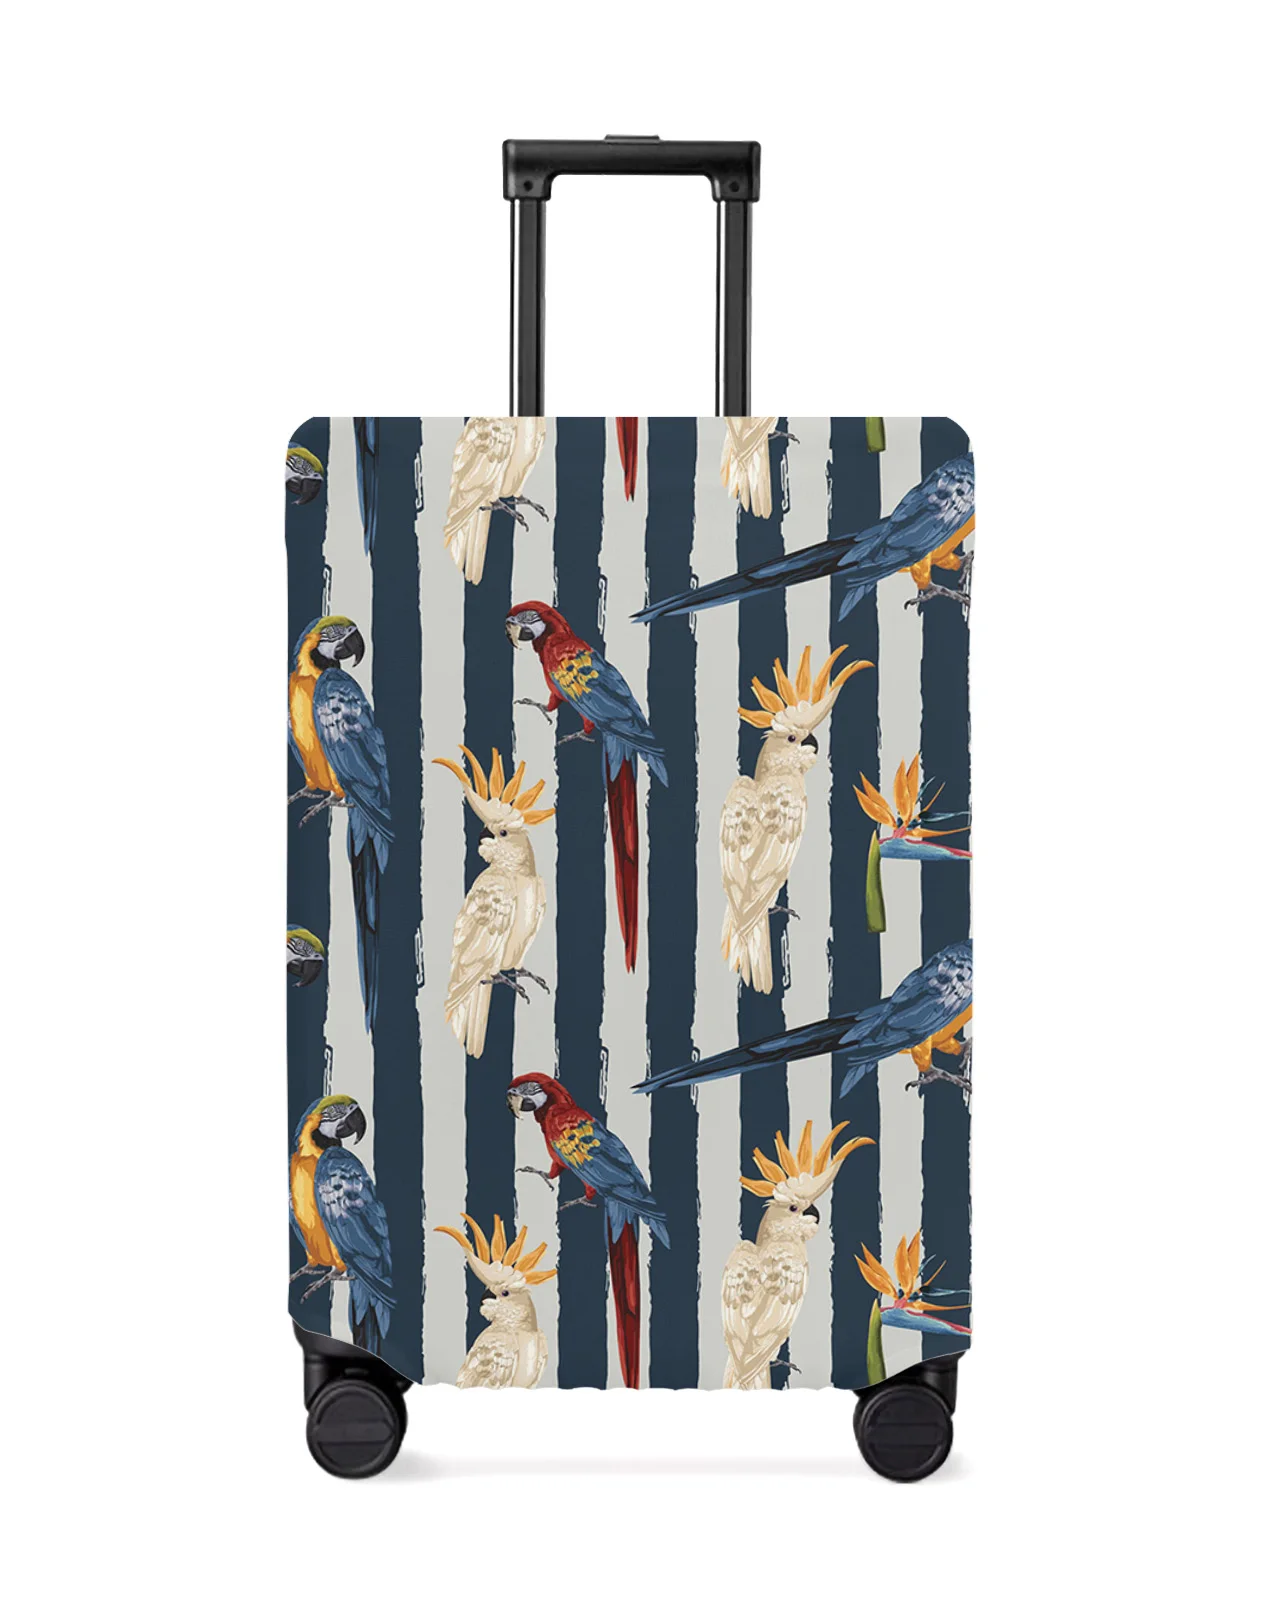 parrot-bird-of-paradise-blue-and-gray-stripes-travel-luggage-cover-elastic-baggage-cover-suitcase-dust-case-travel-accessories